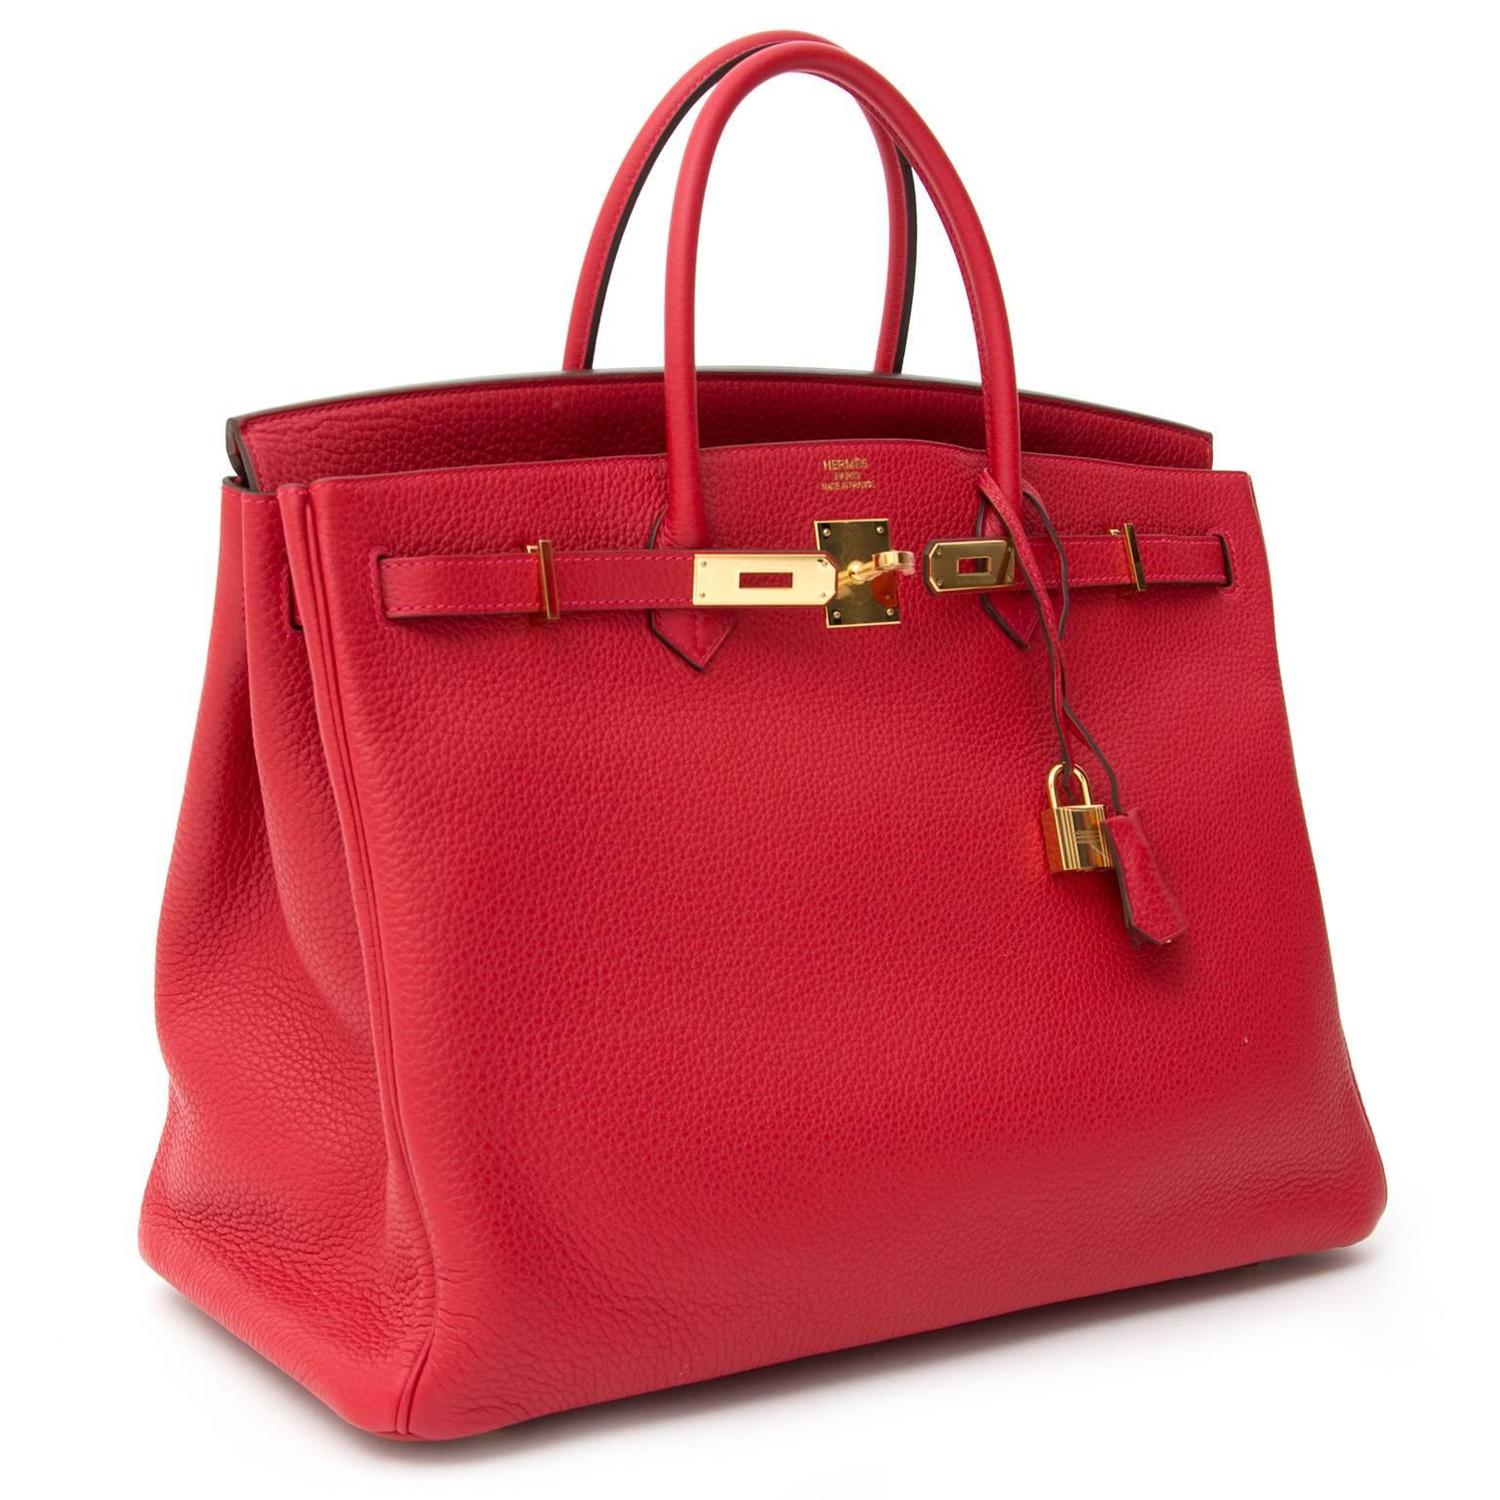 Brand*New Herms Birkin 40 Clemence Taurillon Rouge Casaque GHW at ...  